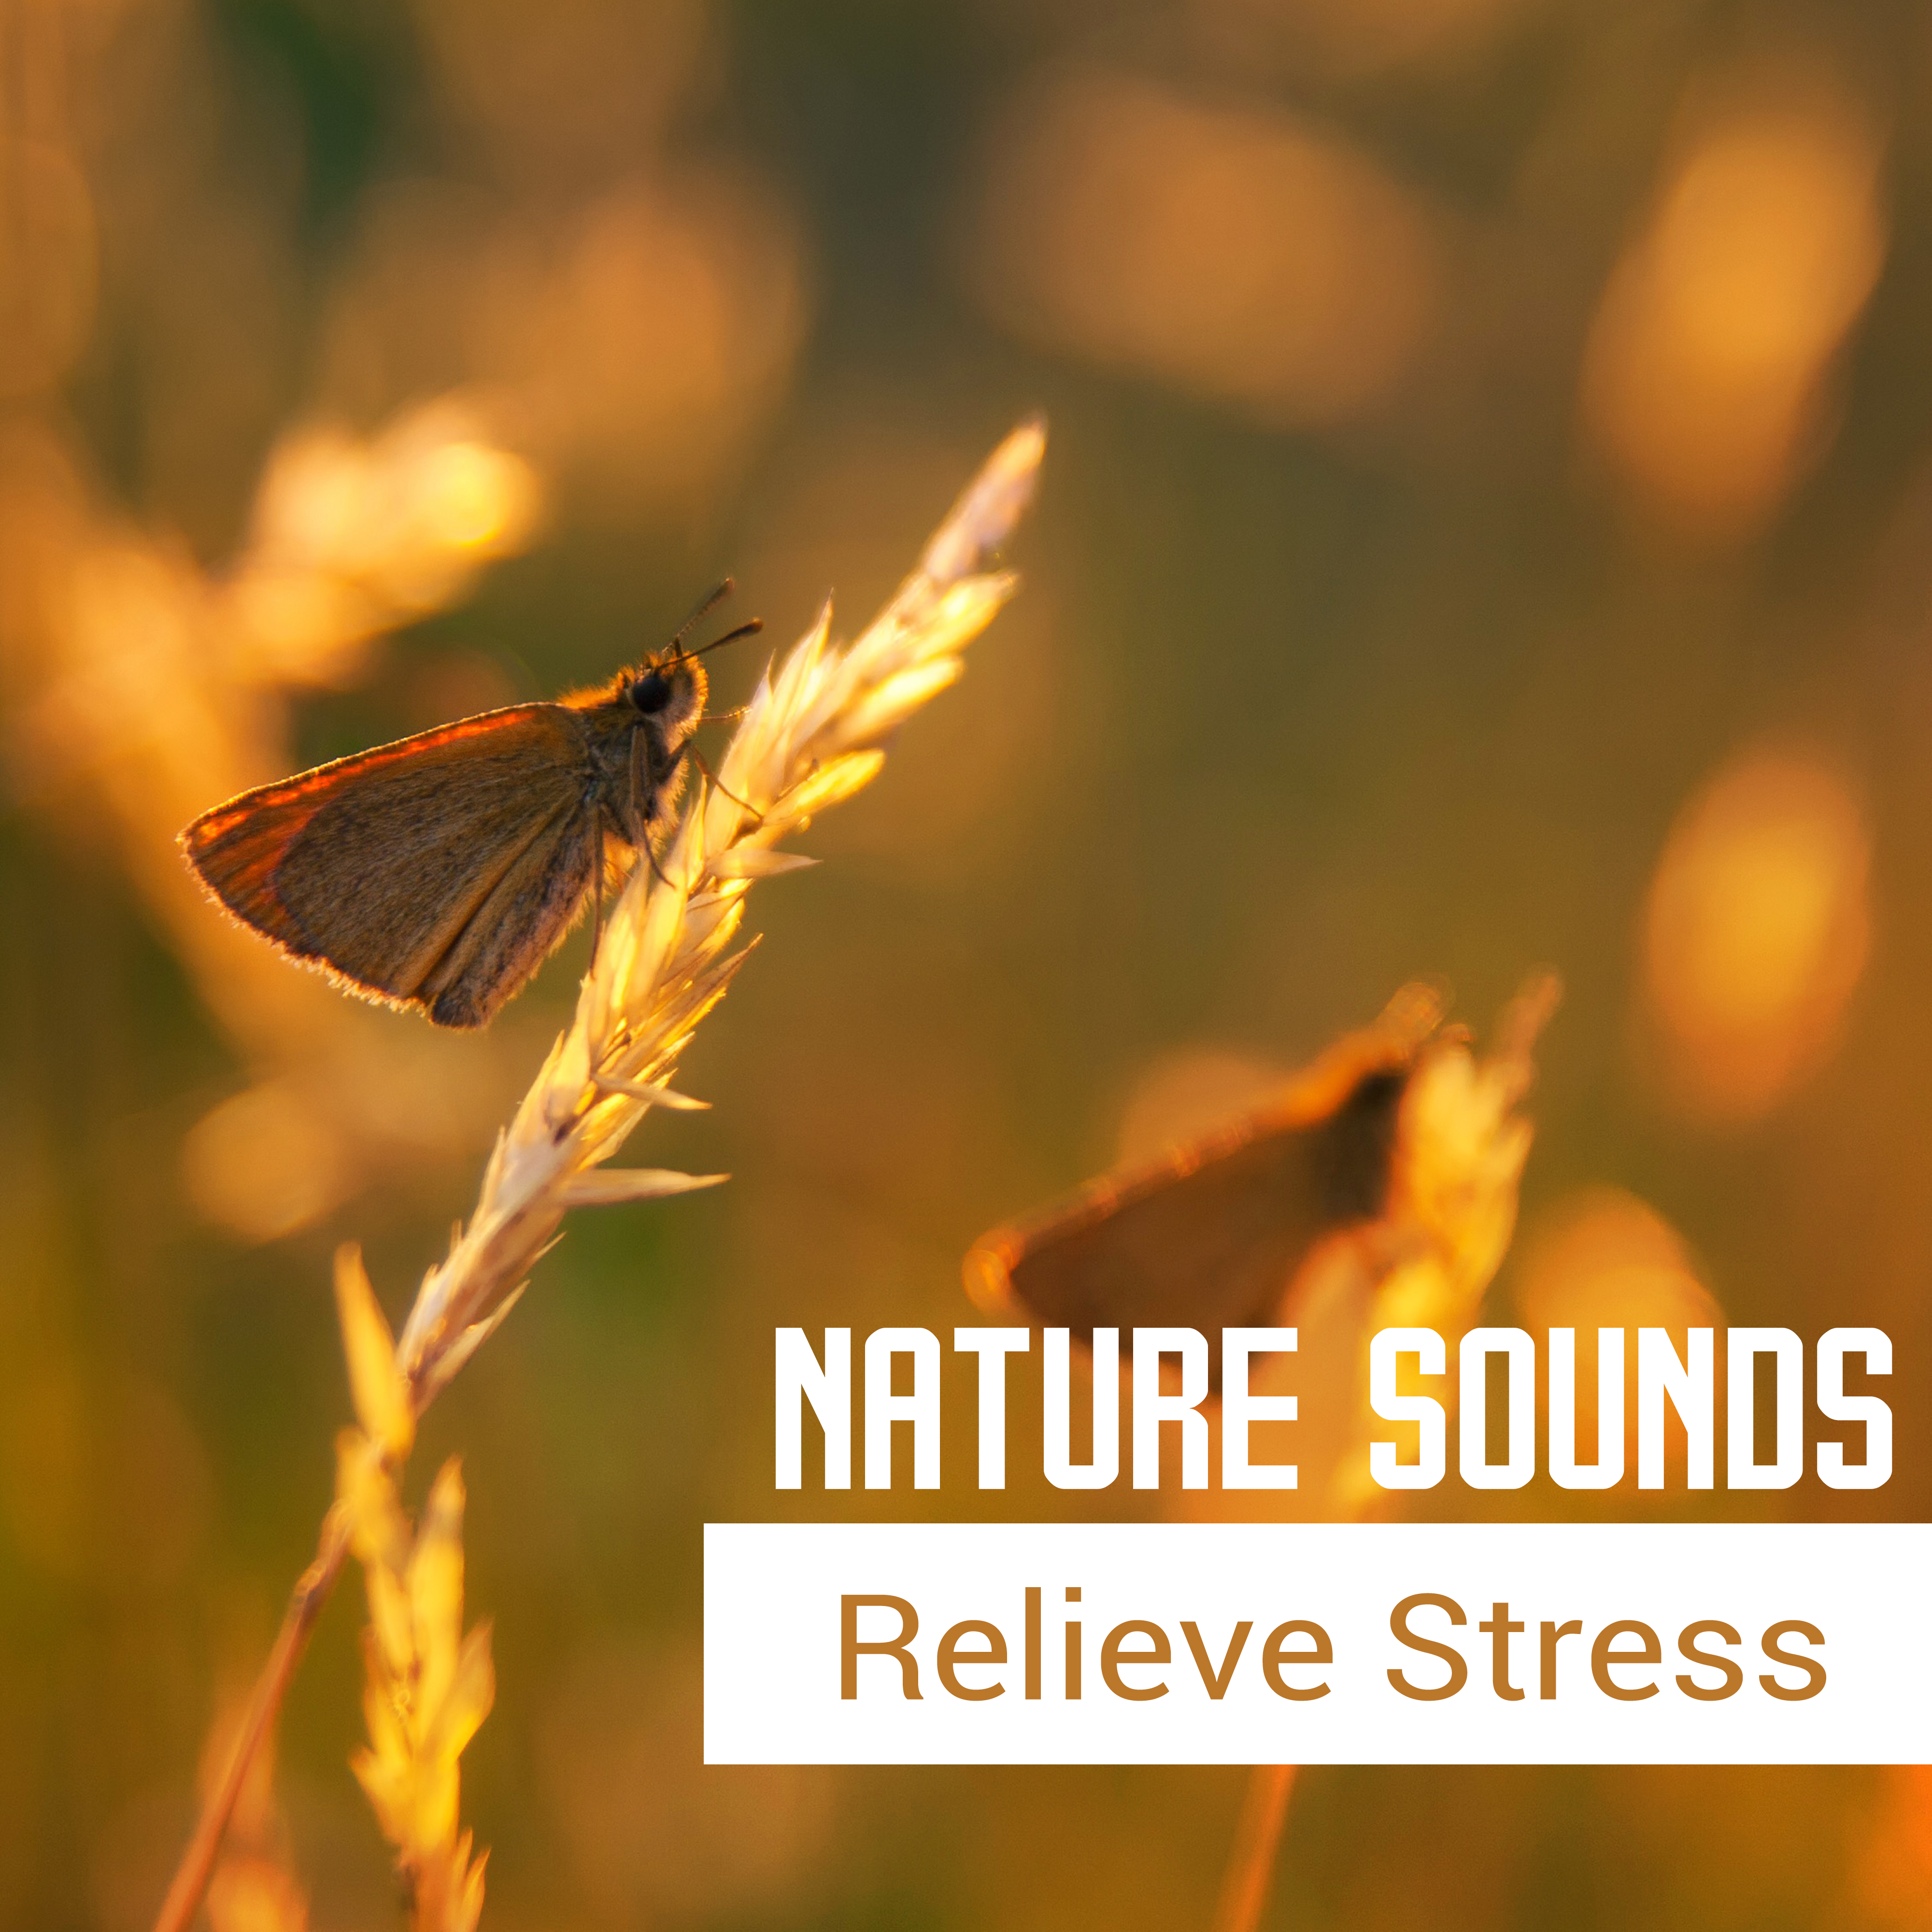 Nature Sounds Relieve Stress – Pure Relaxation, Gentle Melodies, Sounds of Sea, Restful Sleep, Meditate